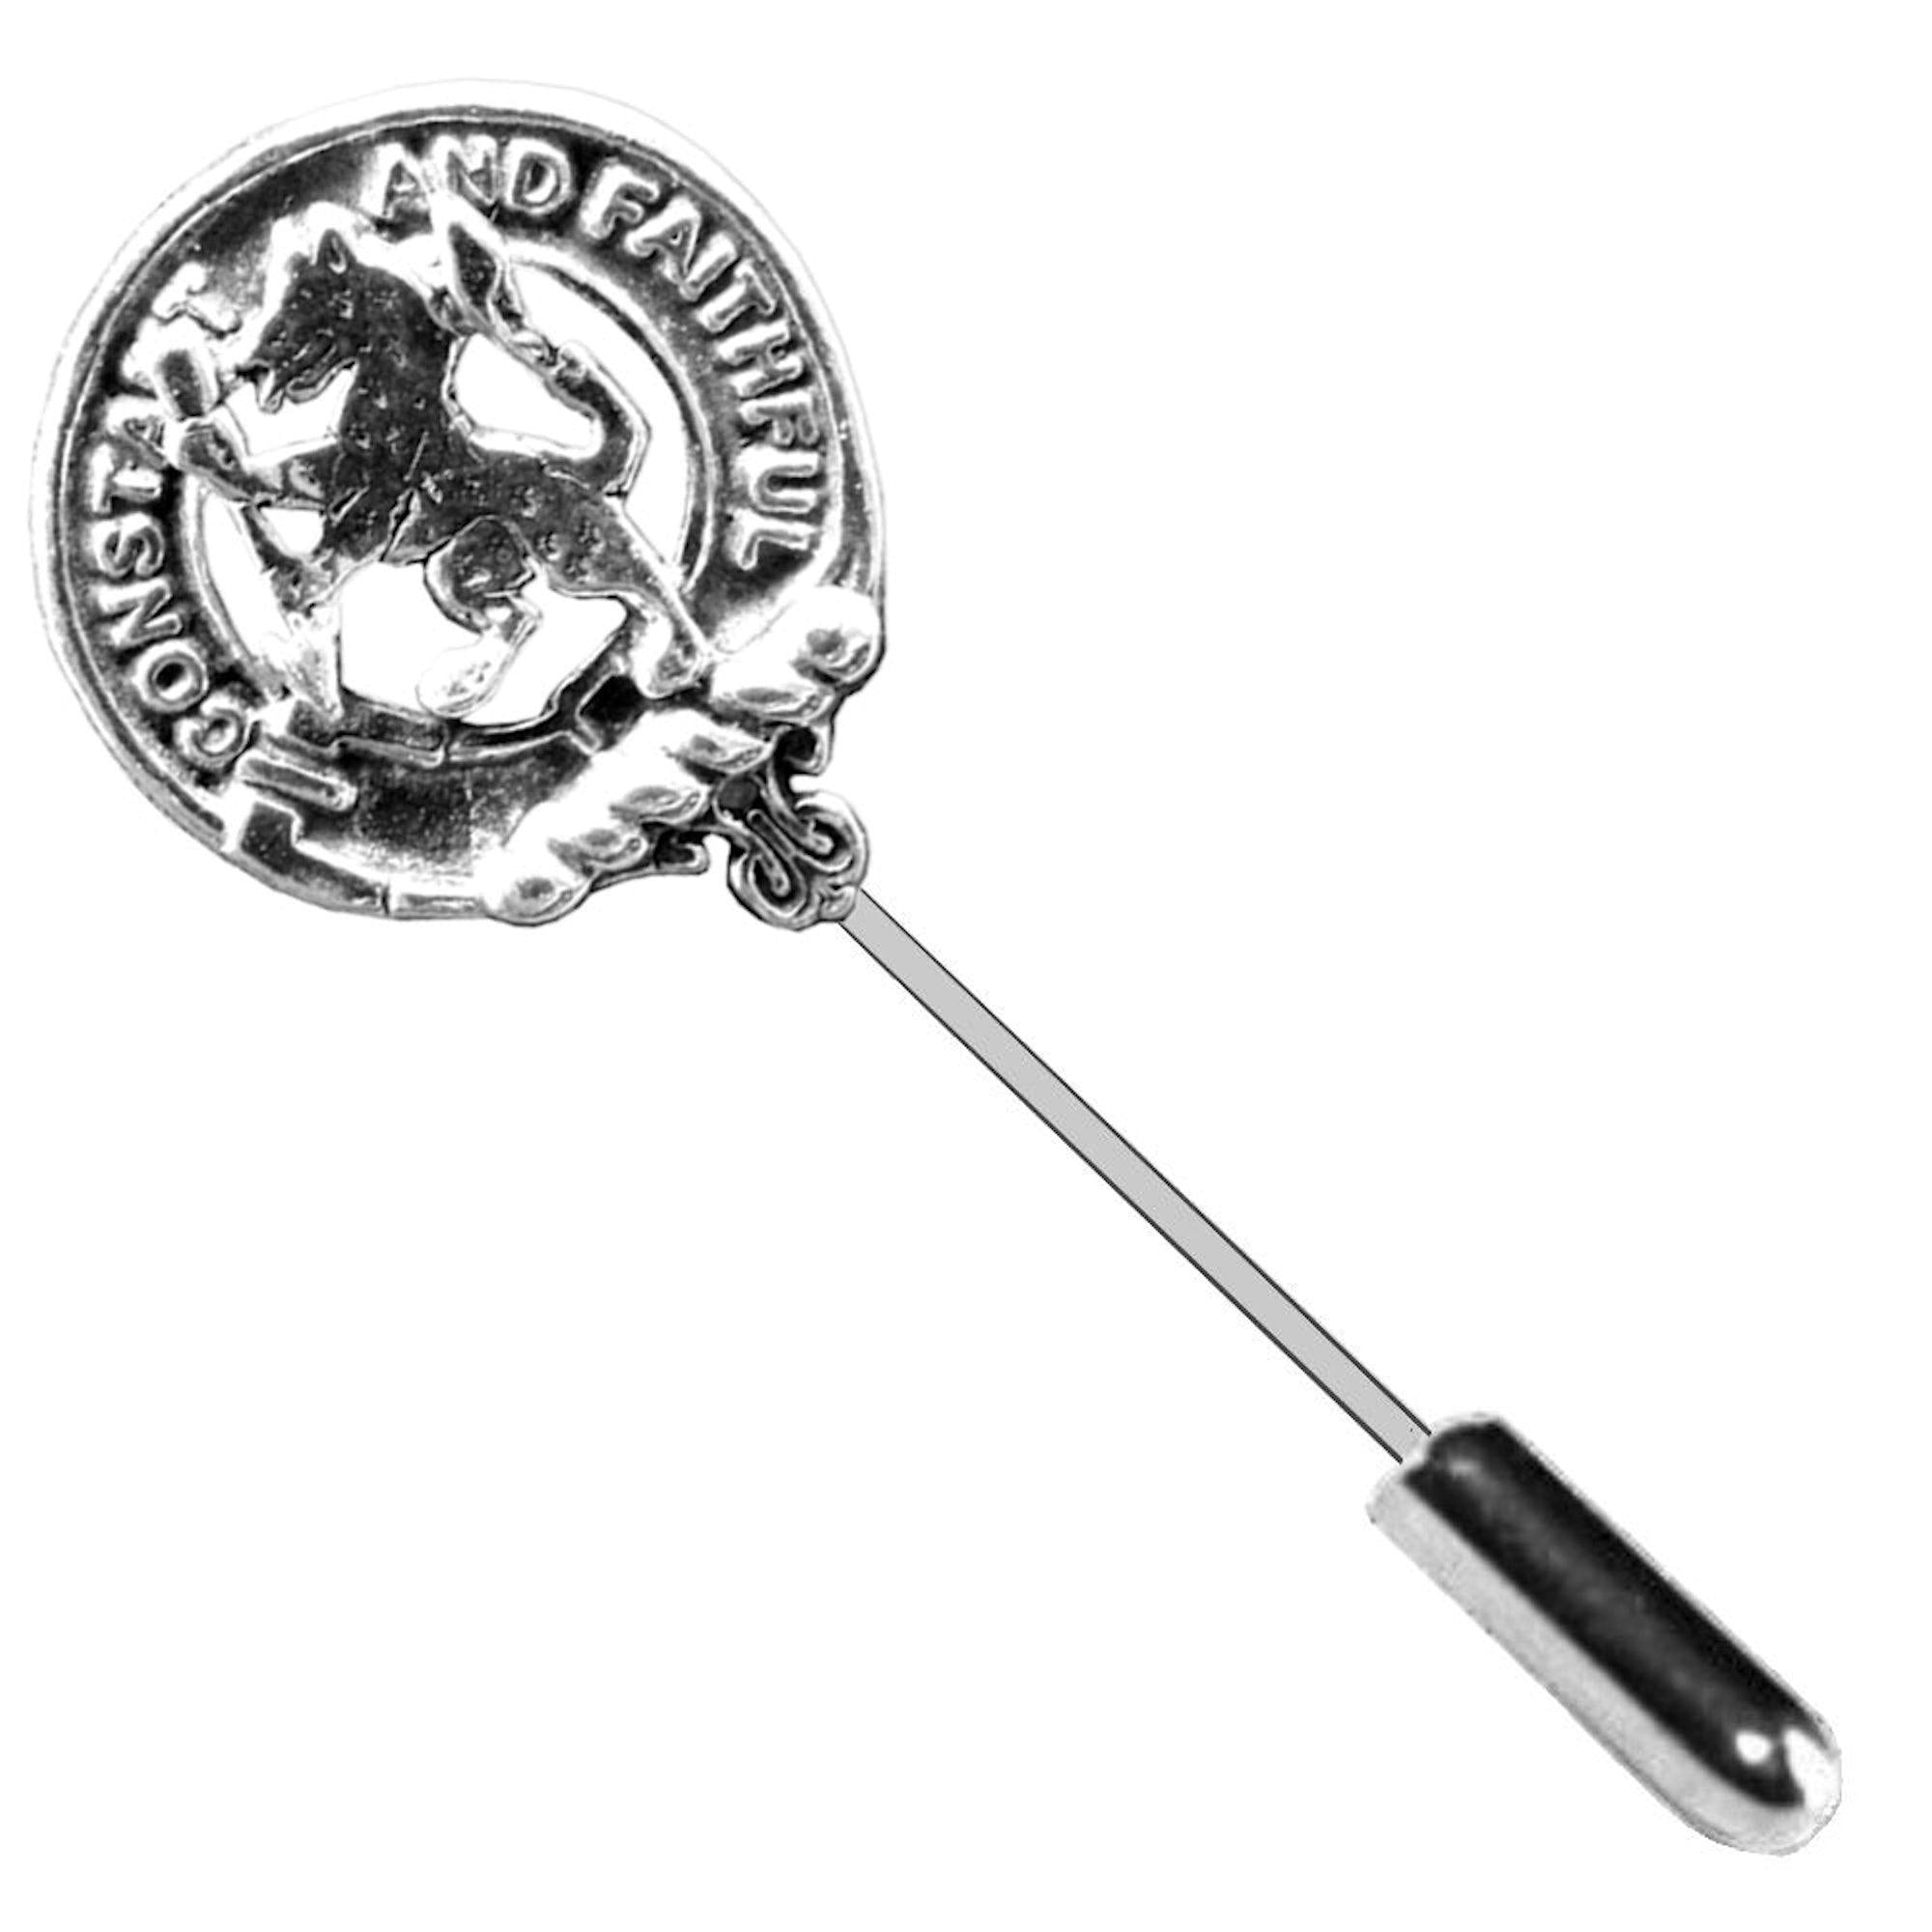 MacQueen Clan Crest Stick or Cravat pin, Sterling Silver